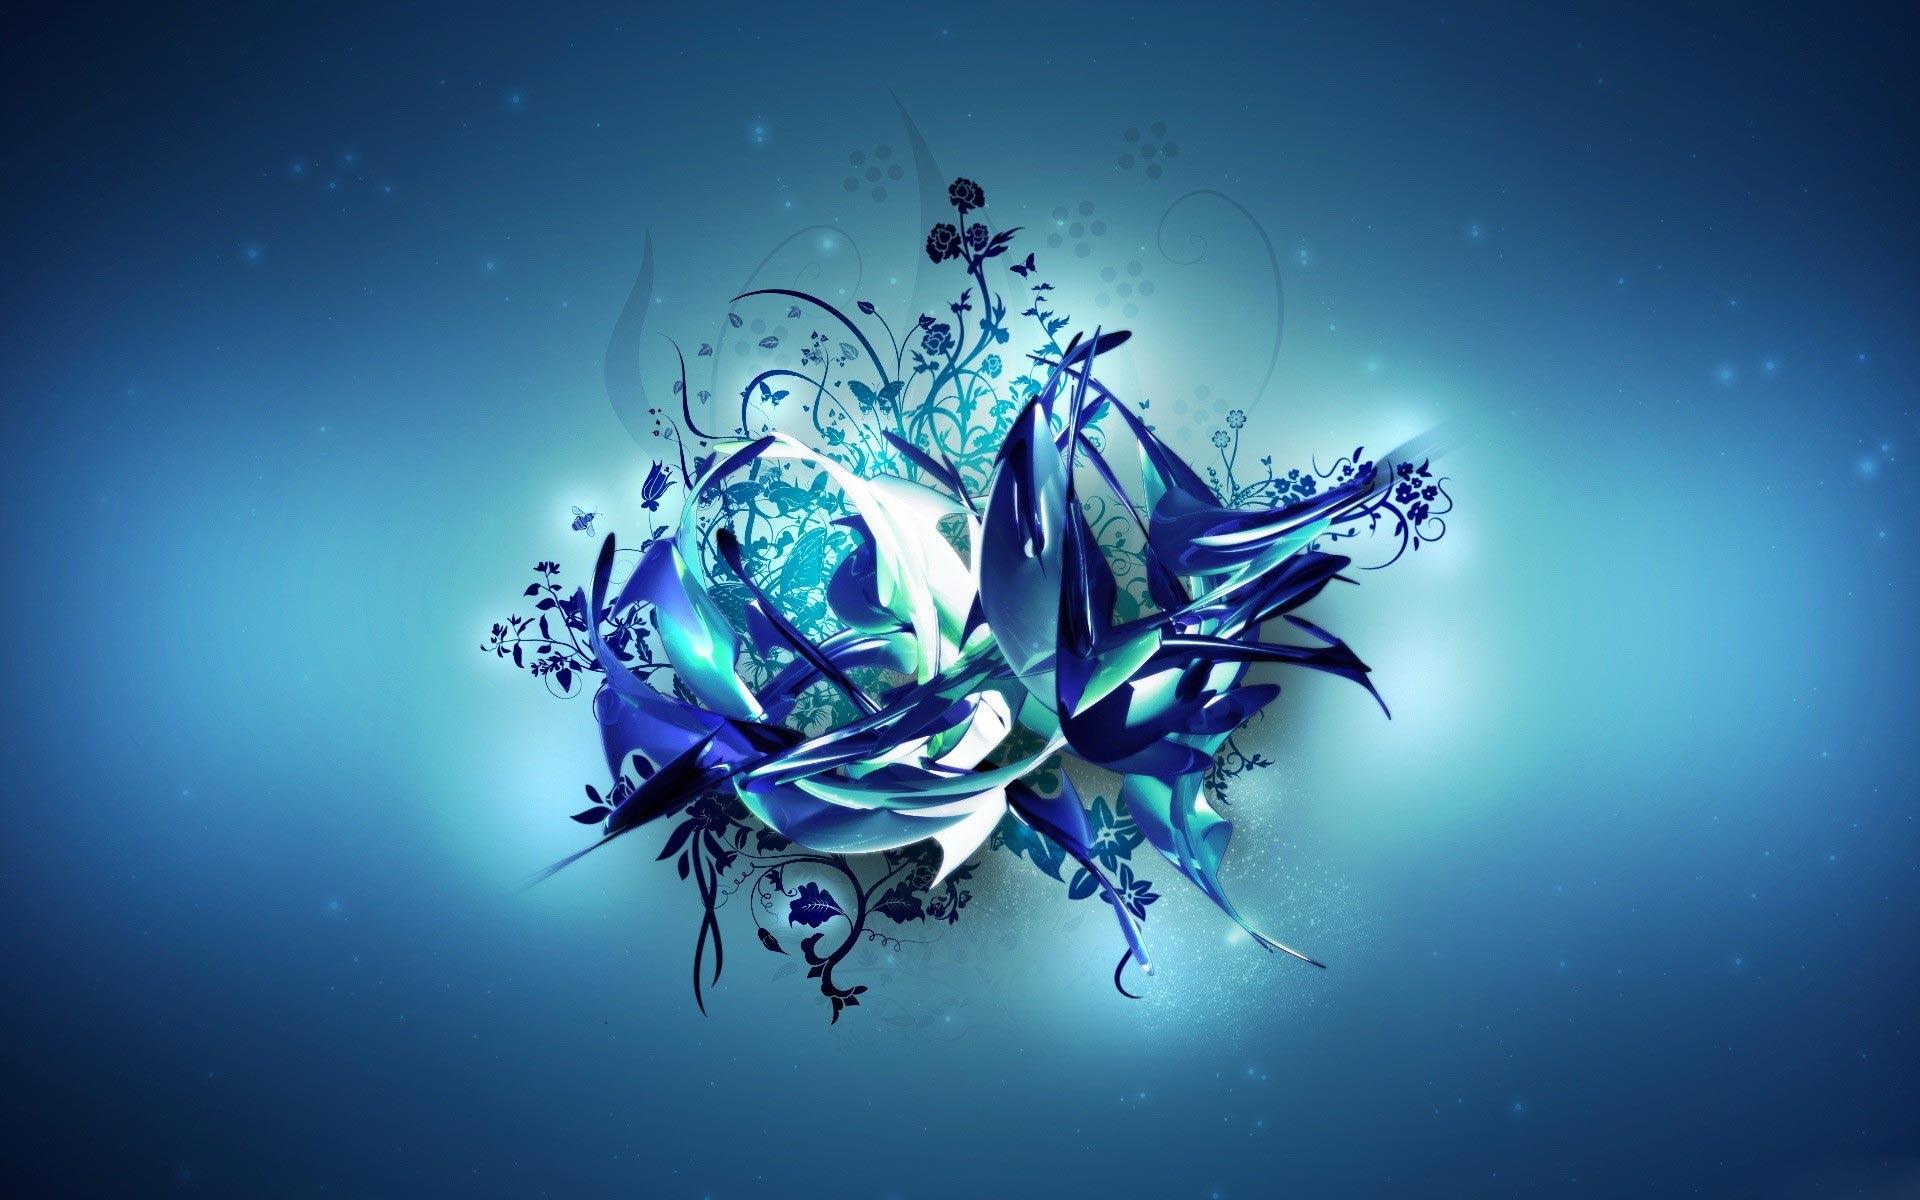 3d Blue Abstract Wallpaper 8544 Hd Wallpapers in 3D   Imagescicom